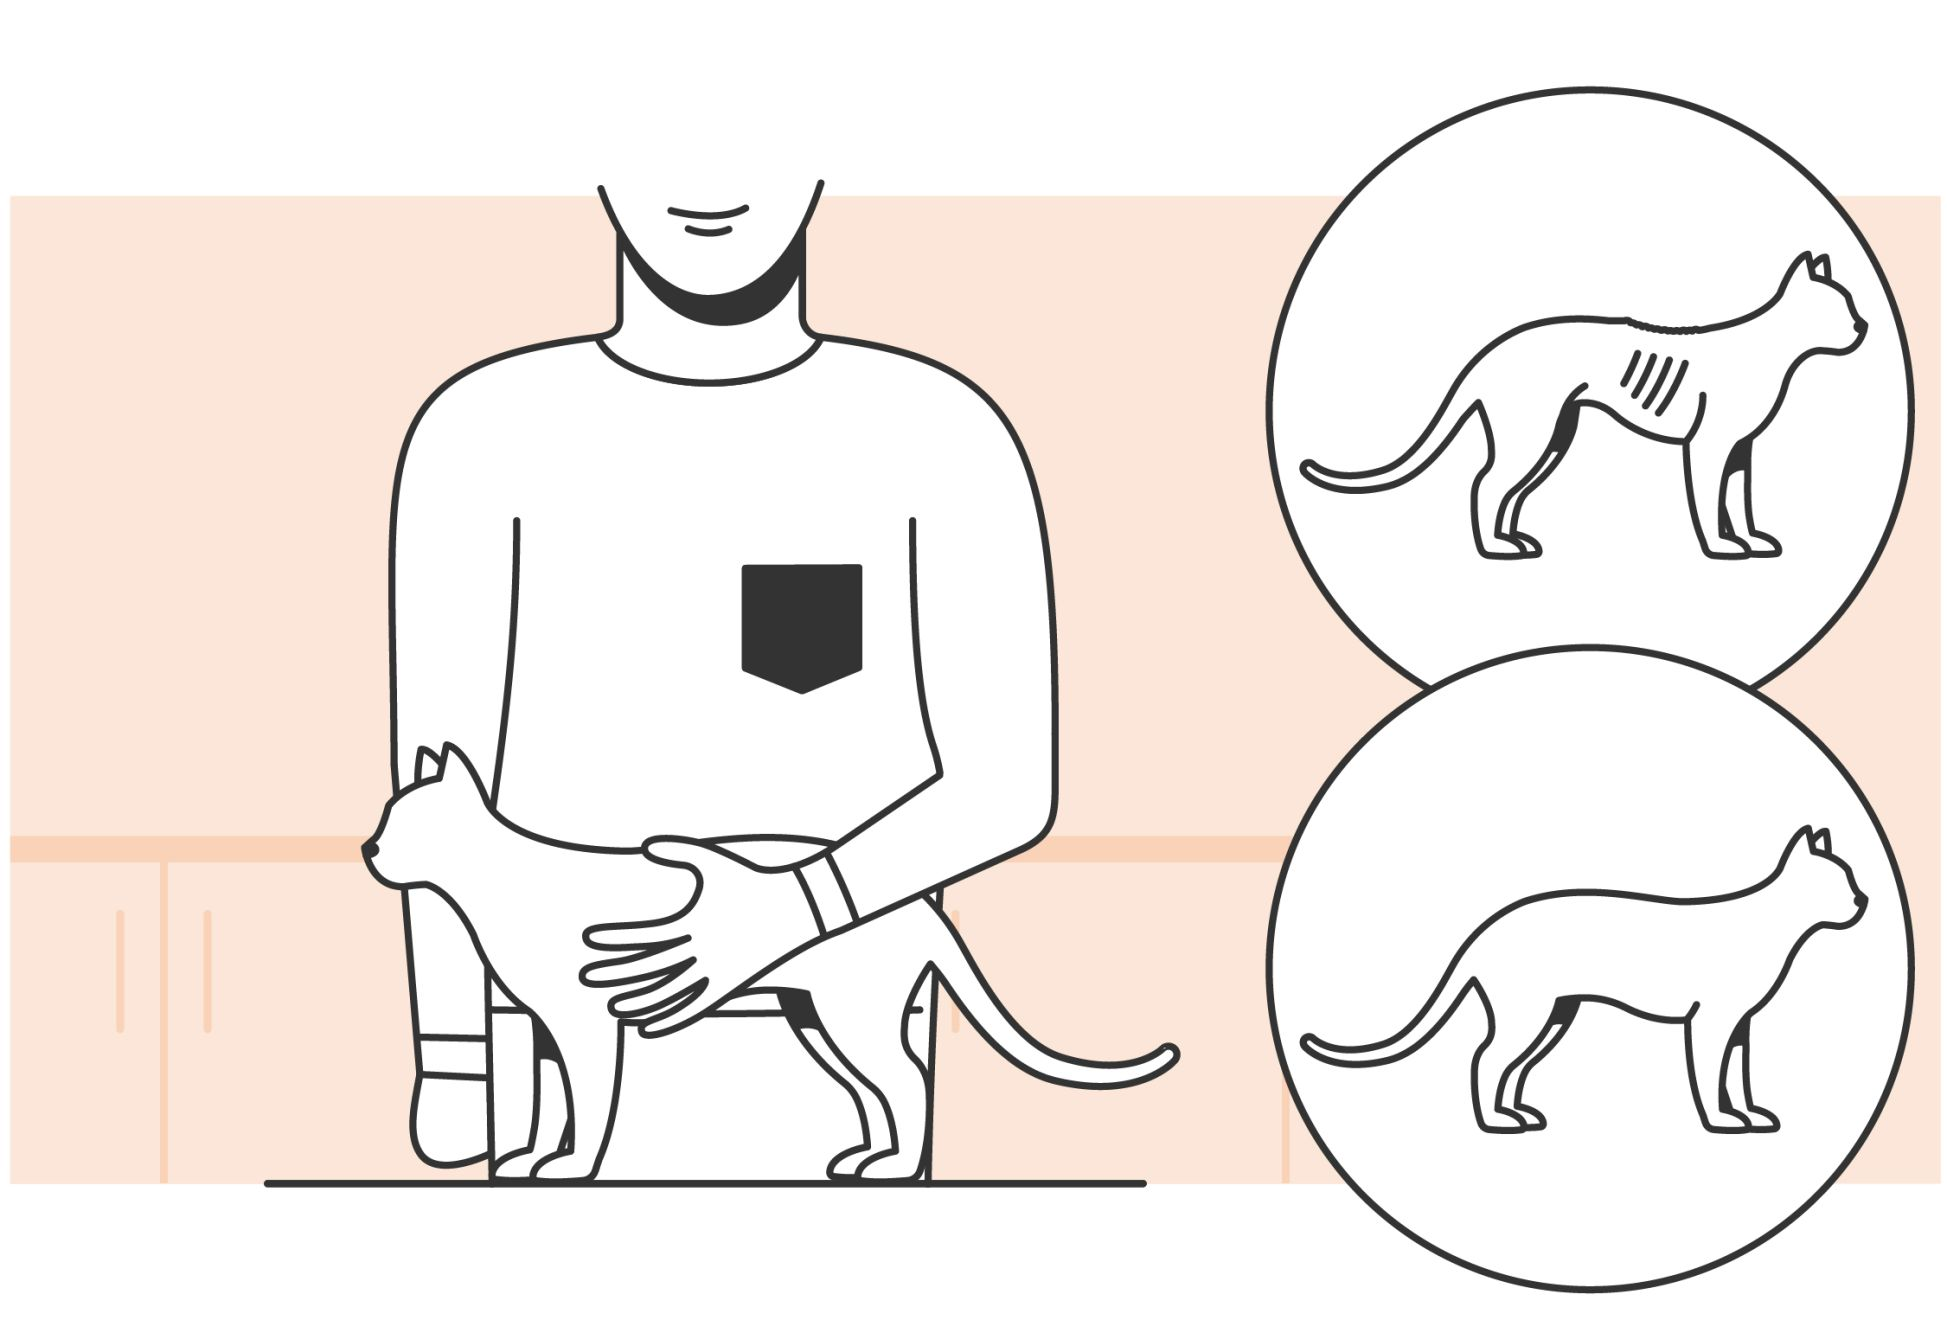 Illustration of a cats body condition score being assessed